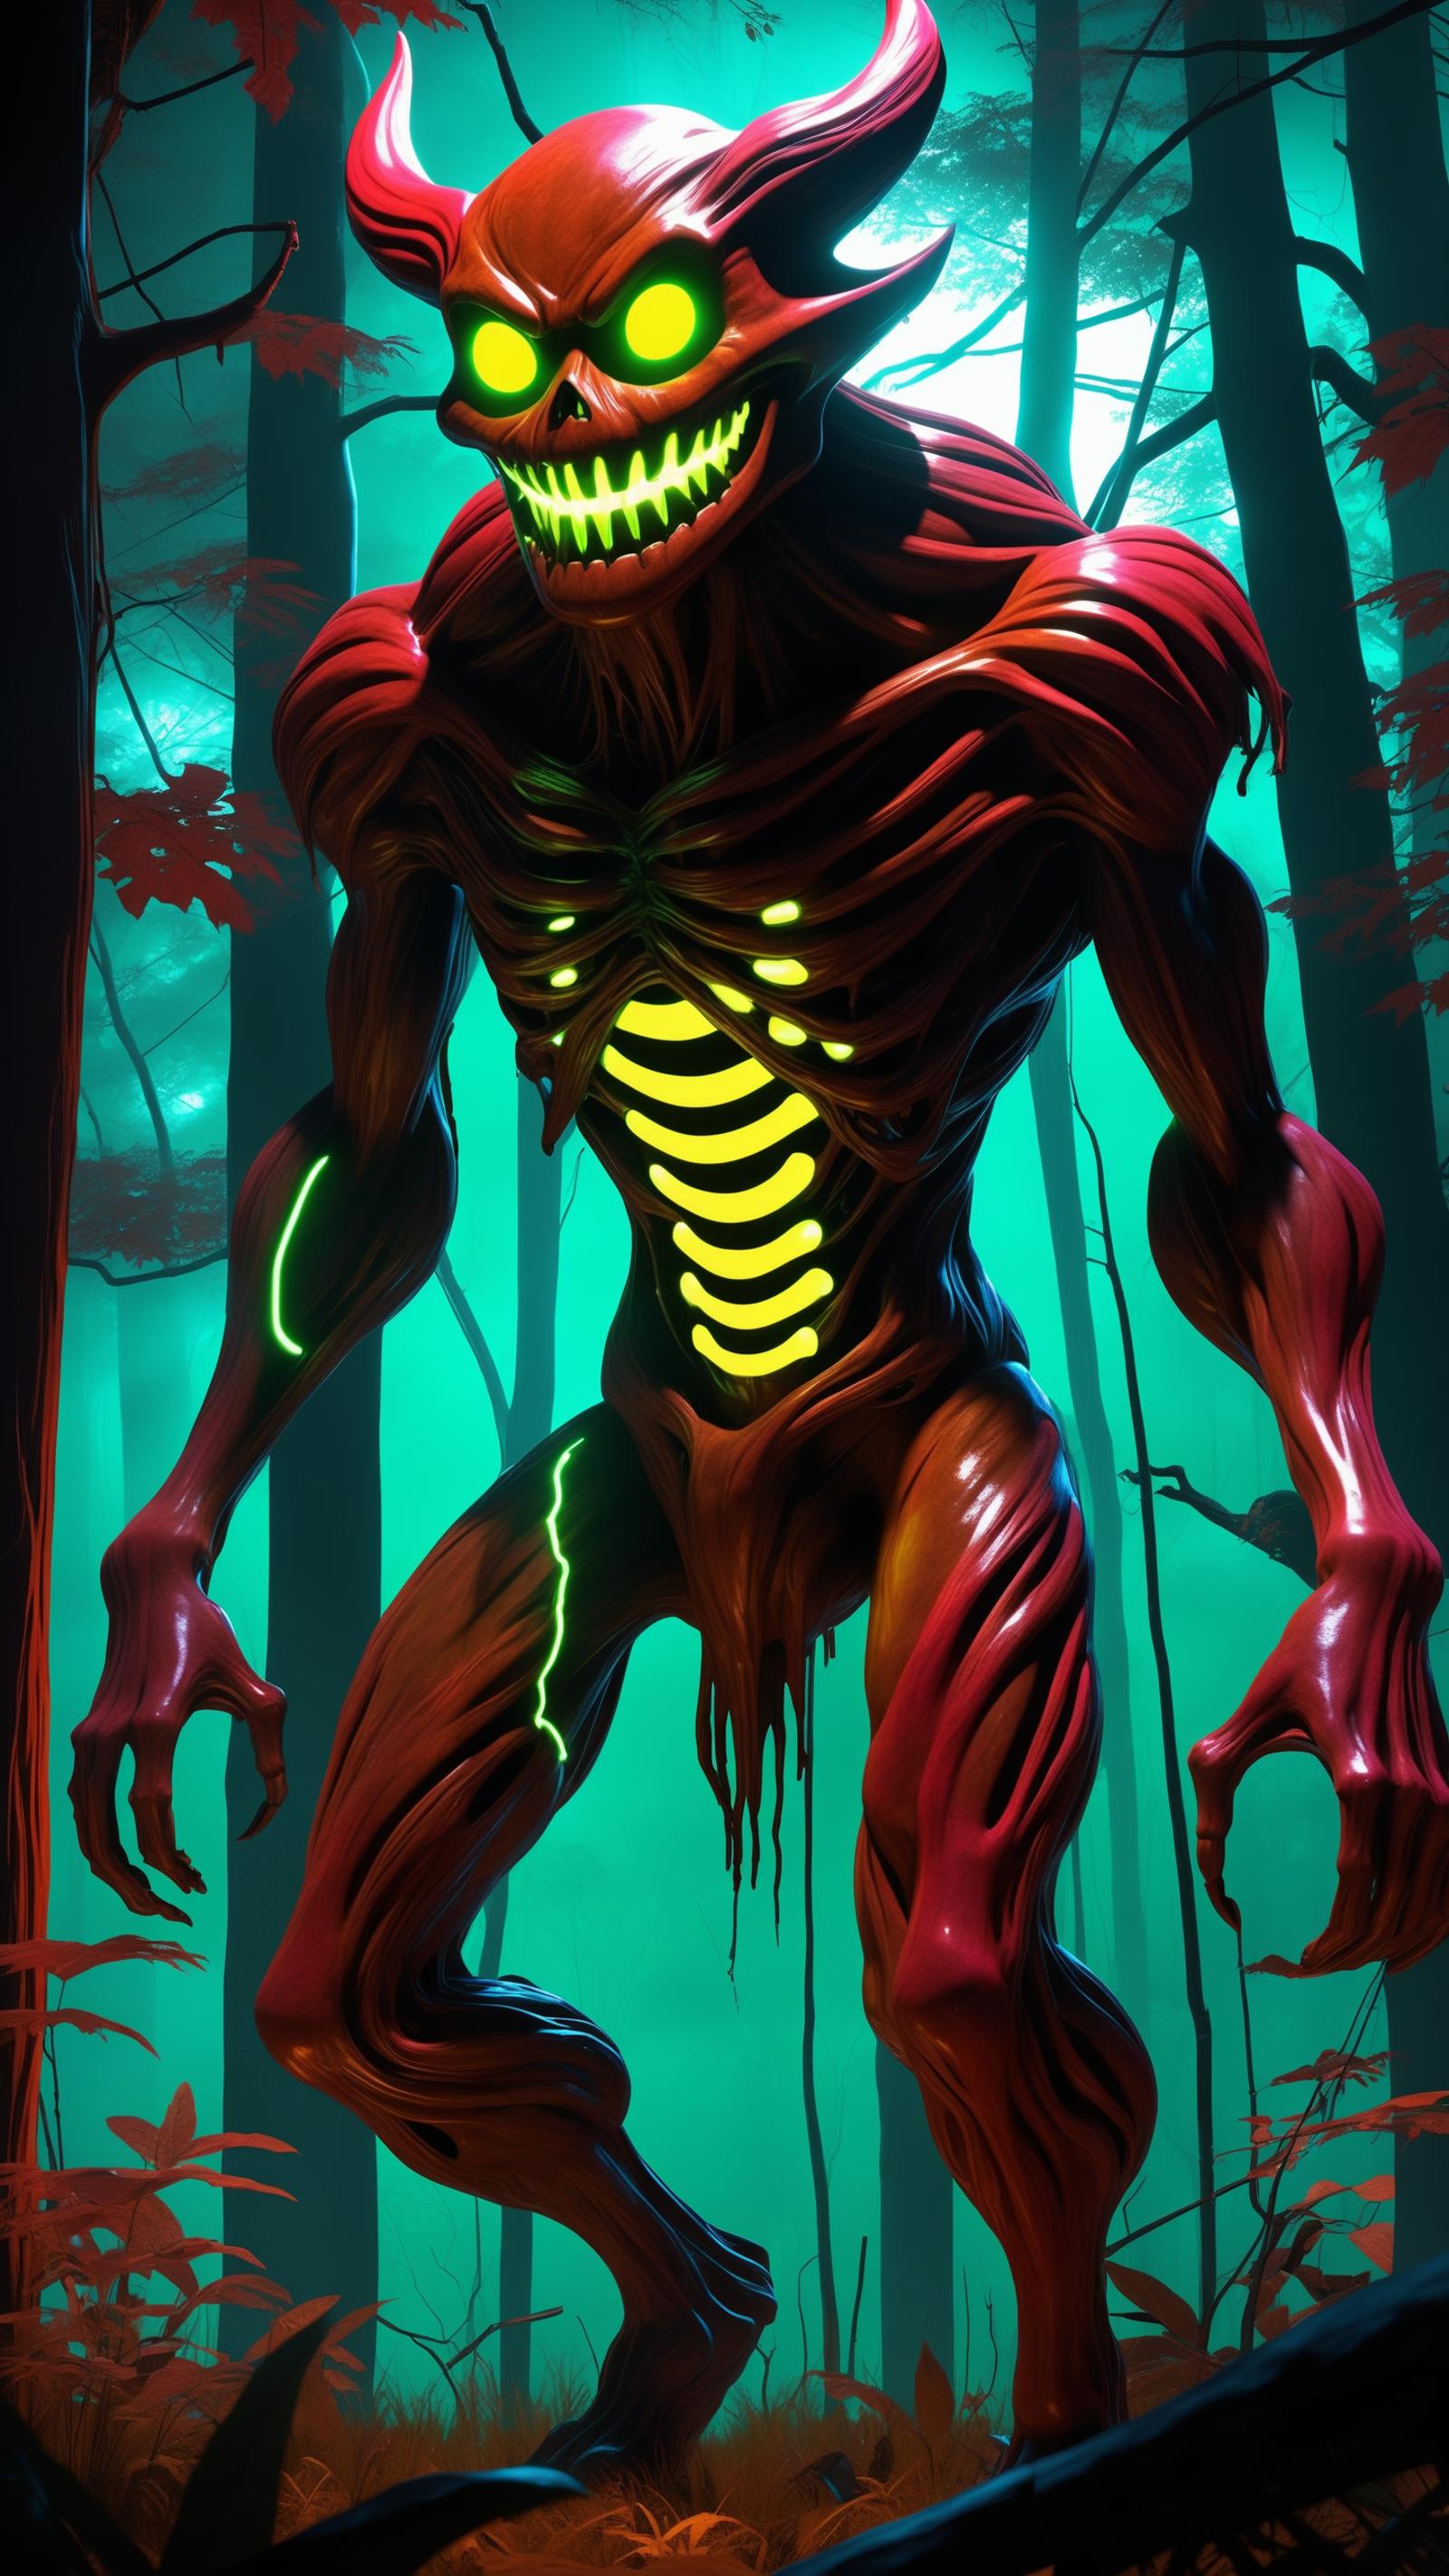 A computer generated image of a monster with glowing yellow veins in a dark forest.